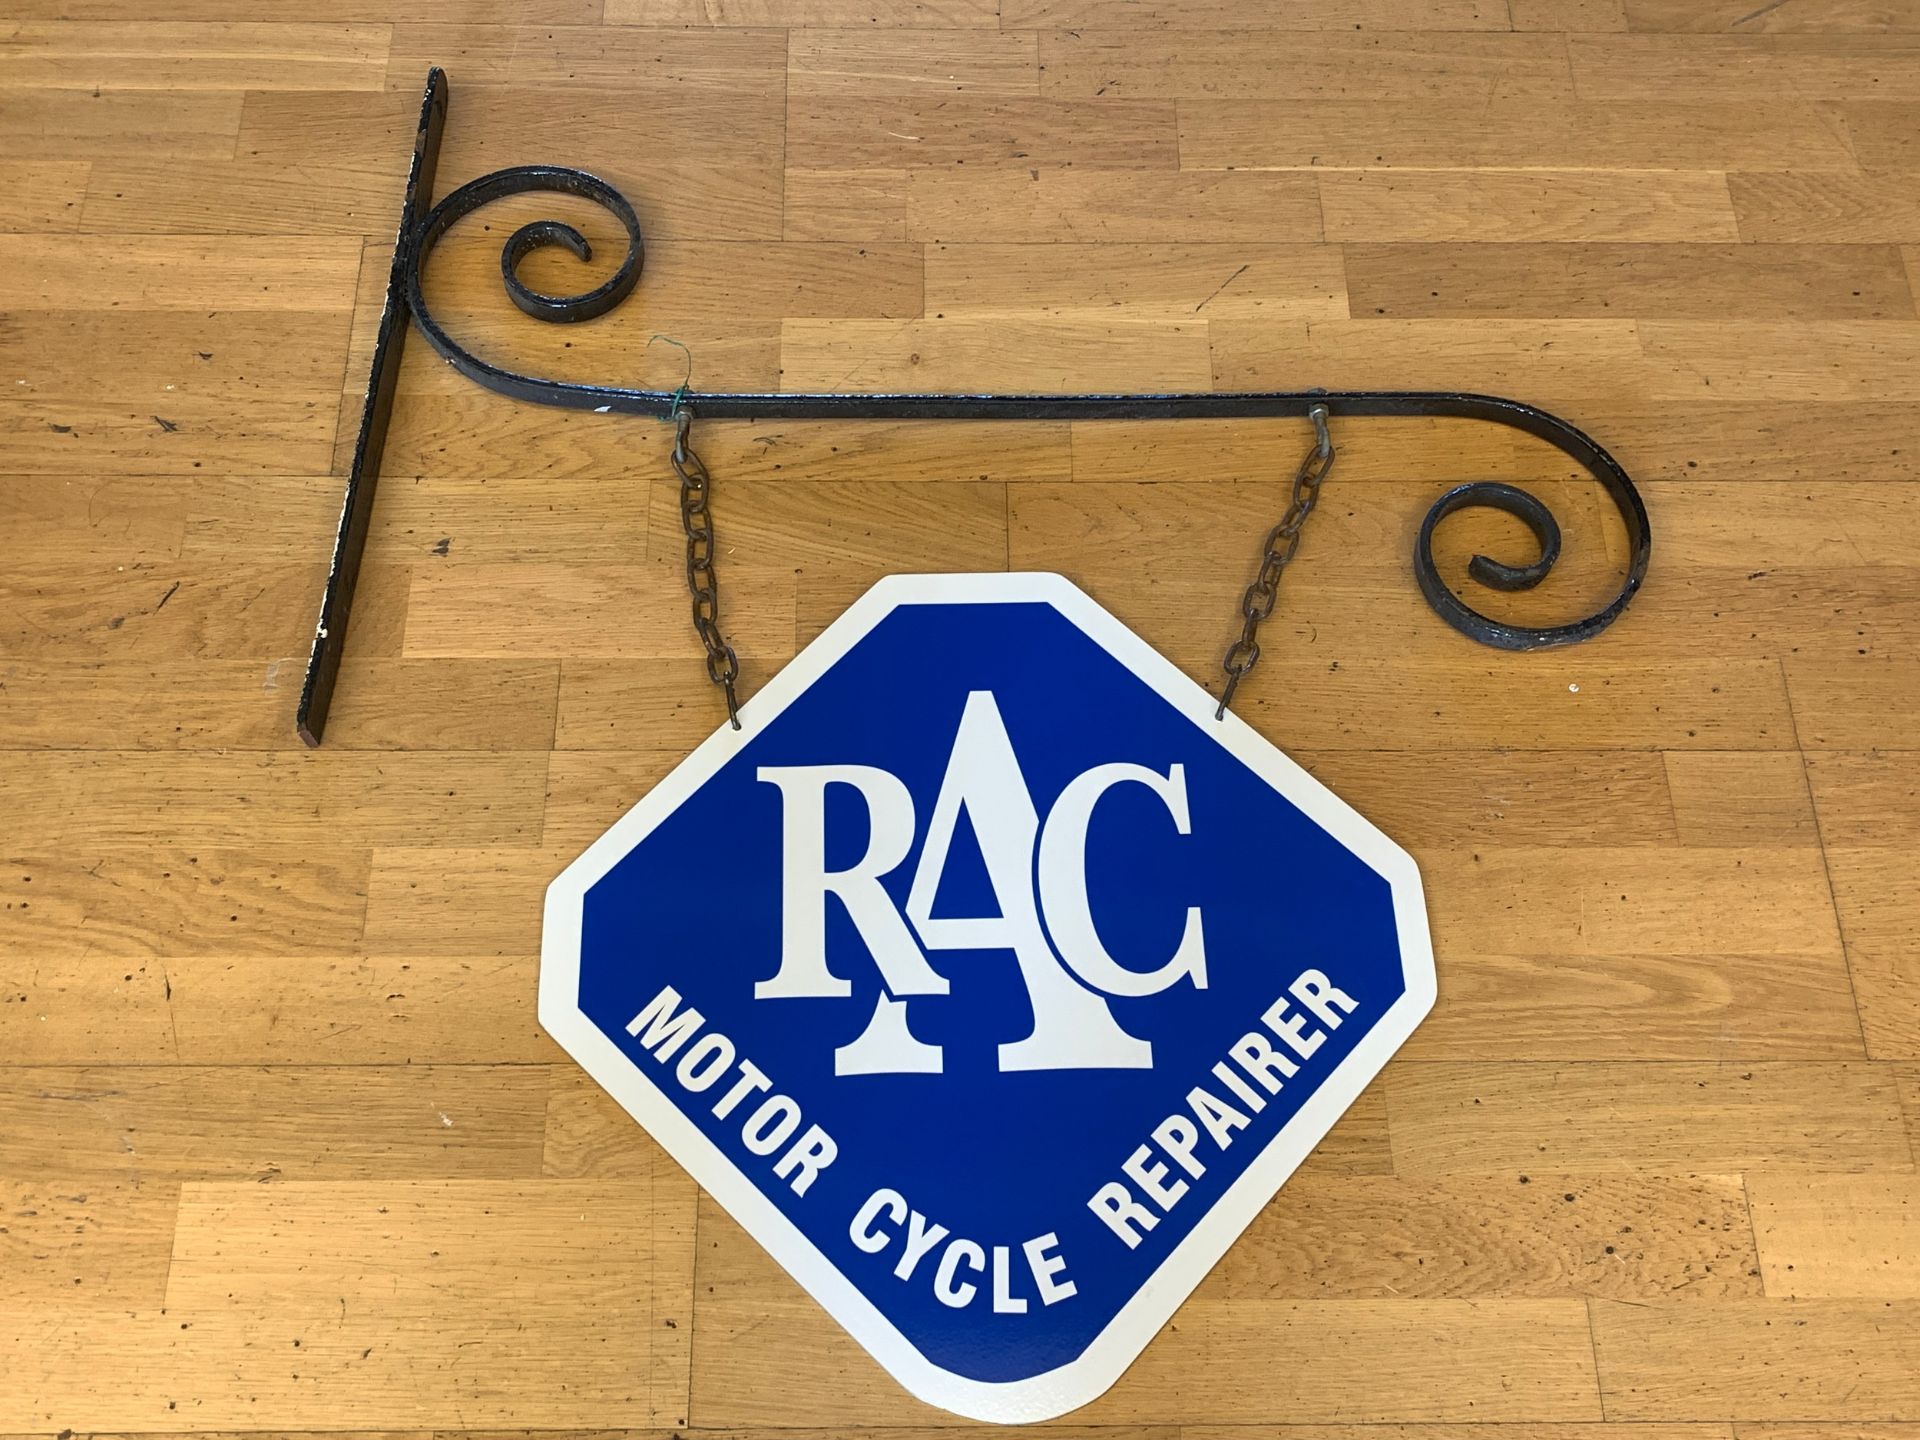 A RAC Motor Cycle Repairer double sided wall hanging sign, metal sign depicting RAC logo, 54cm x